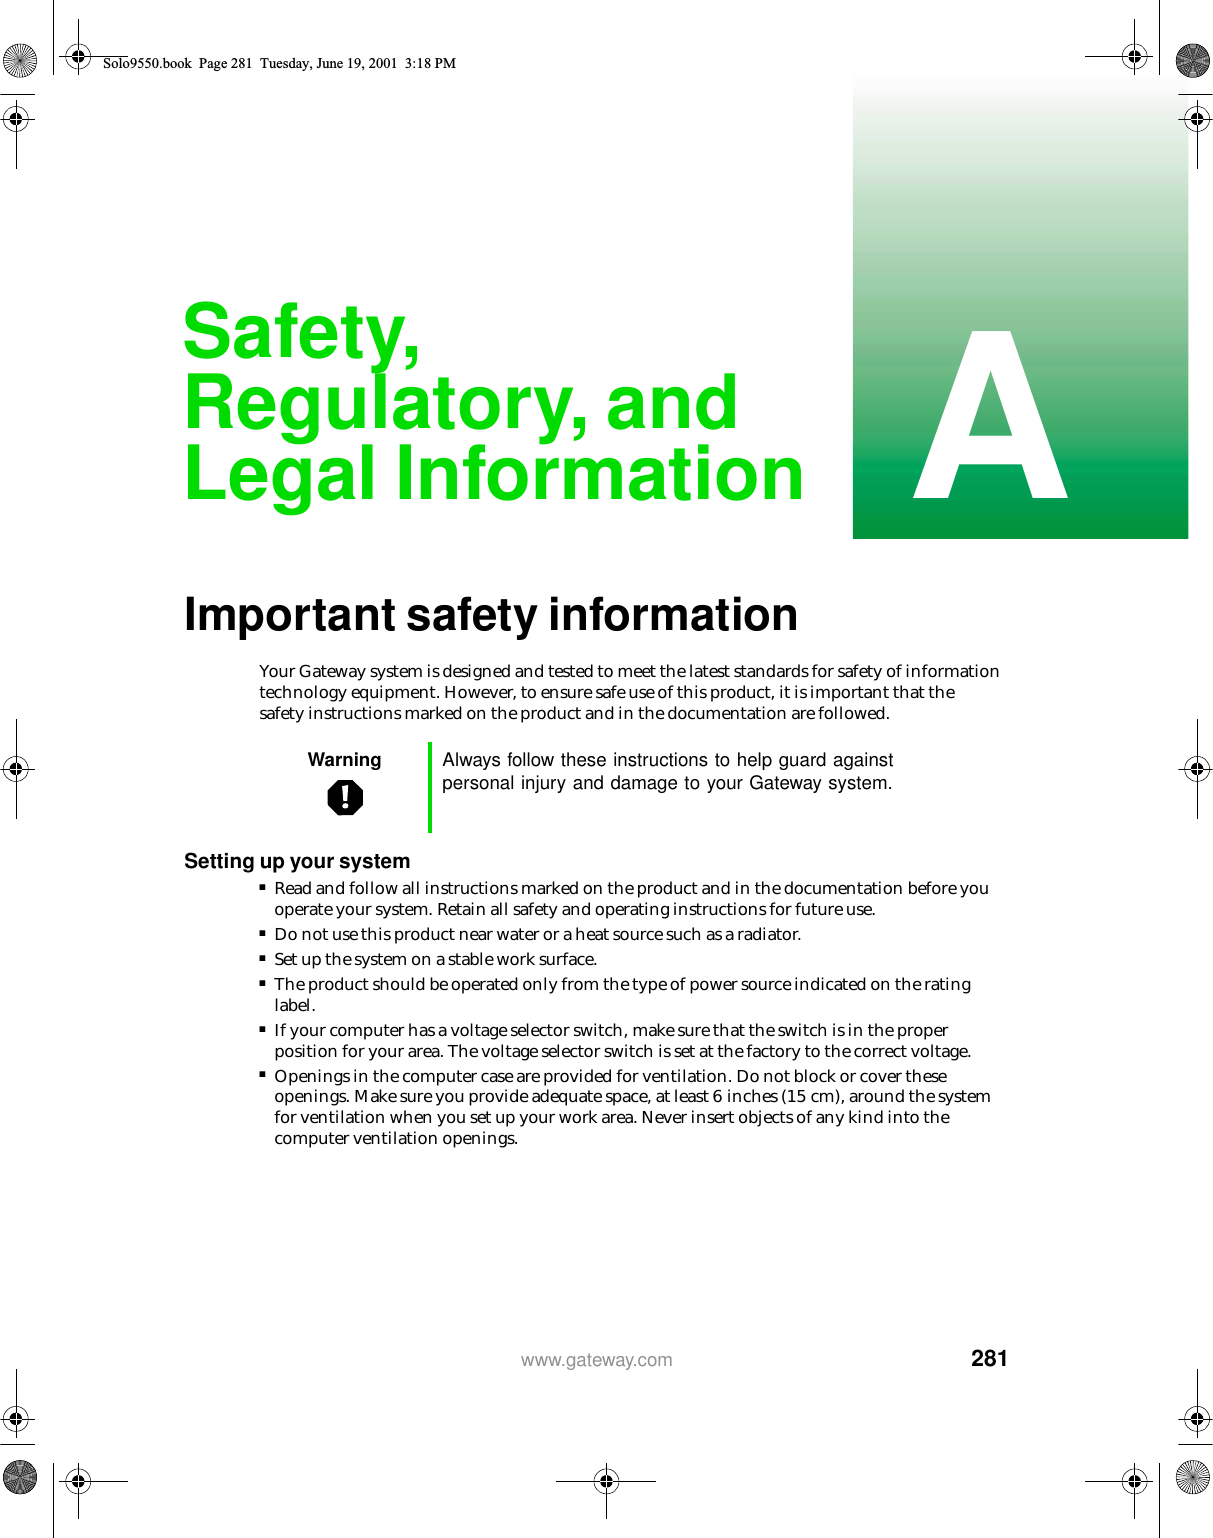 281Awww.gateway.comSafety, Regulatory, and Legal InformationImportant safety informationYour Gateway system is designed and tested to meet the latest standards for safety of information technology equipment. However, to ensure safe use of this product, it is important that the safety instructions marked on the product and in the documentation are followed.Setting up your system■Read and follow all instructions marked on the product and in the documentation before you operate your system. Retain all safety and operating instructions for future use.■Do not use this product near water or a heat source such as a radiator.■Set up the system on a stable work surface.■The product should be operated only from the type of power source indicated on the rating label.■If your computer has a voltage selector switch, make sure that the switch is in the proper position for your area. The voltage selector switch is set at the factory to the correct voltage.■Openings in the computer case are provided for ventilation. Do not block or cover these openings. Make sure you provide adequate space, at least 6 inches (15 cm), around the system for ventilation when you set up your work area. Never insert objects of any kind into the computer ventilation openings.Warning Always follow these instructions to help guard against personal injury and damage to your Gateway system.Solo9550.book Page 281 Tuesday, June 19, 2001 3:18 PM